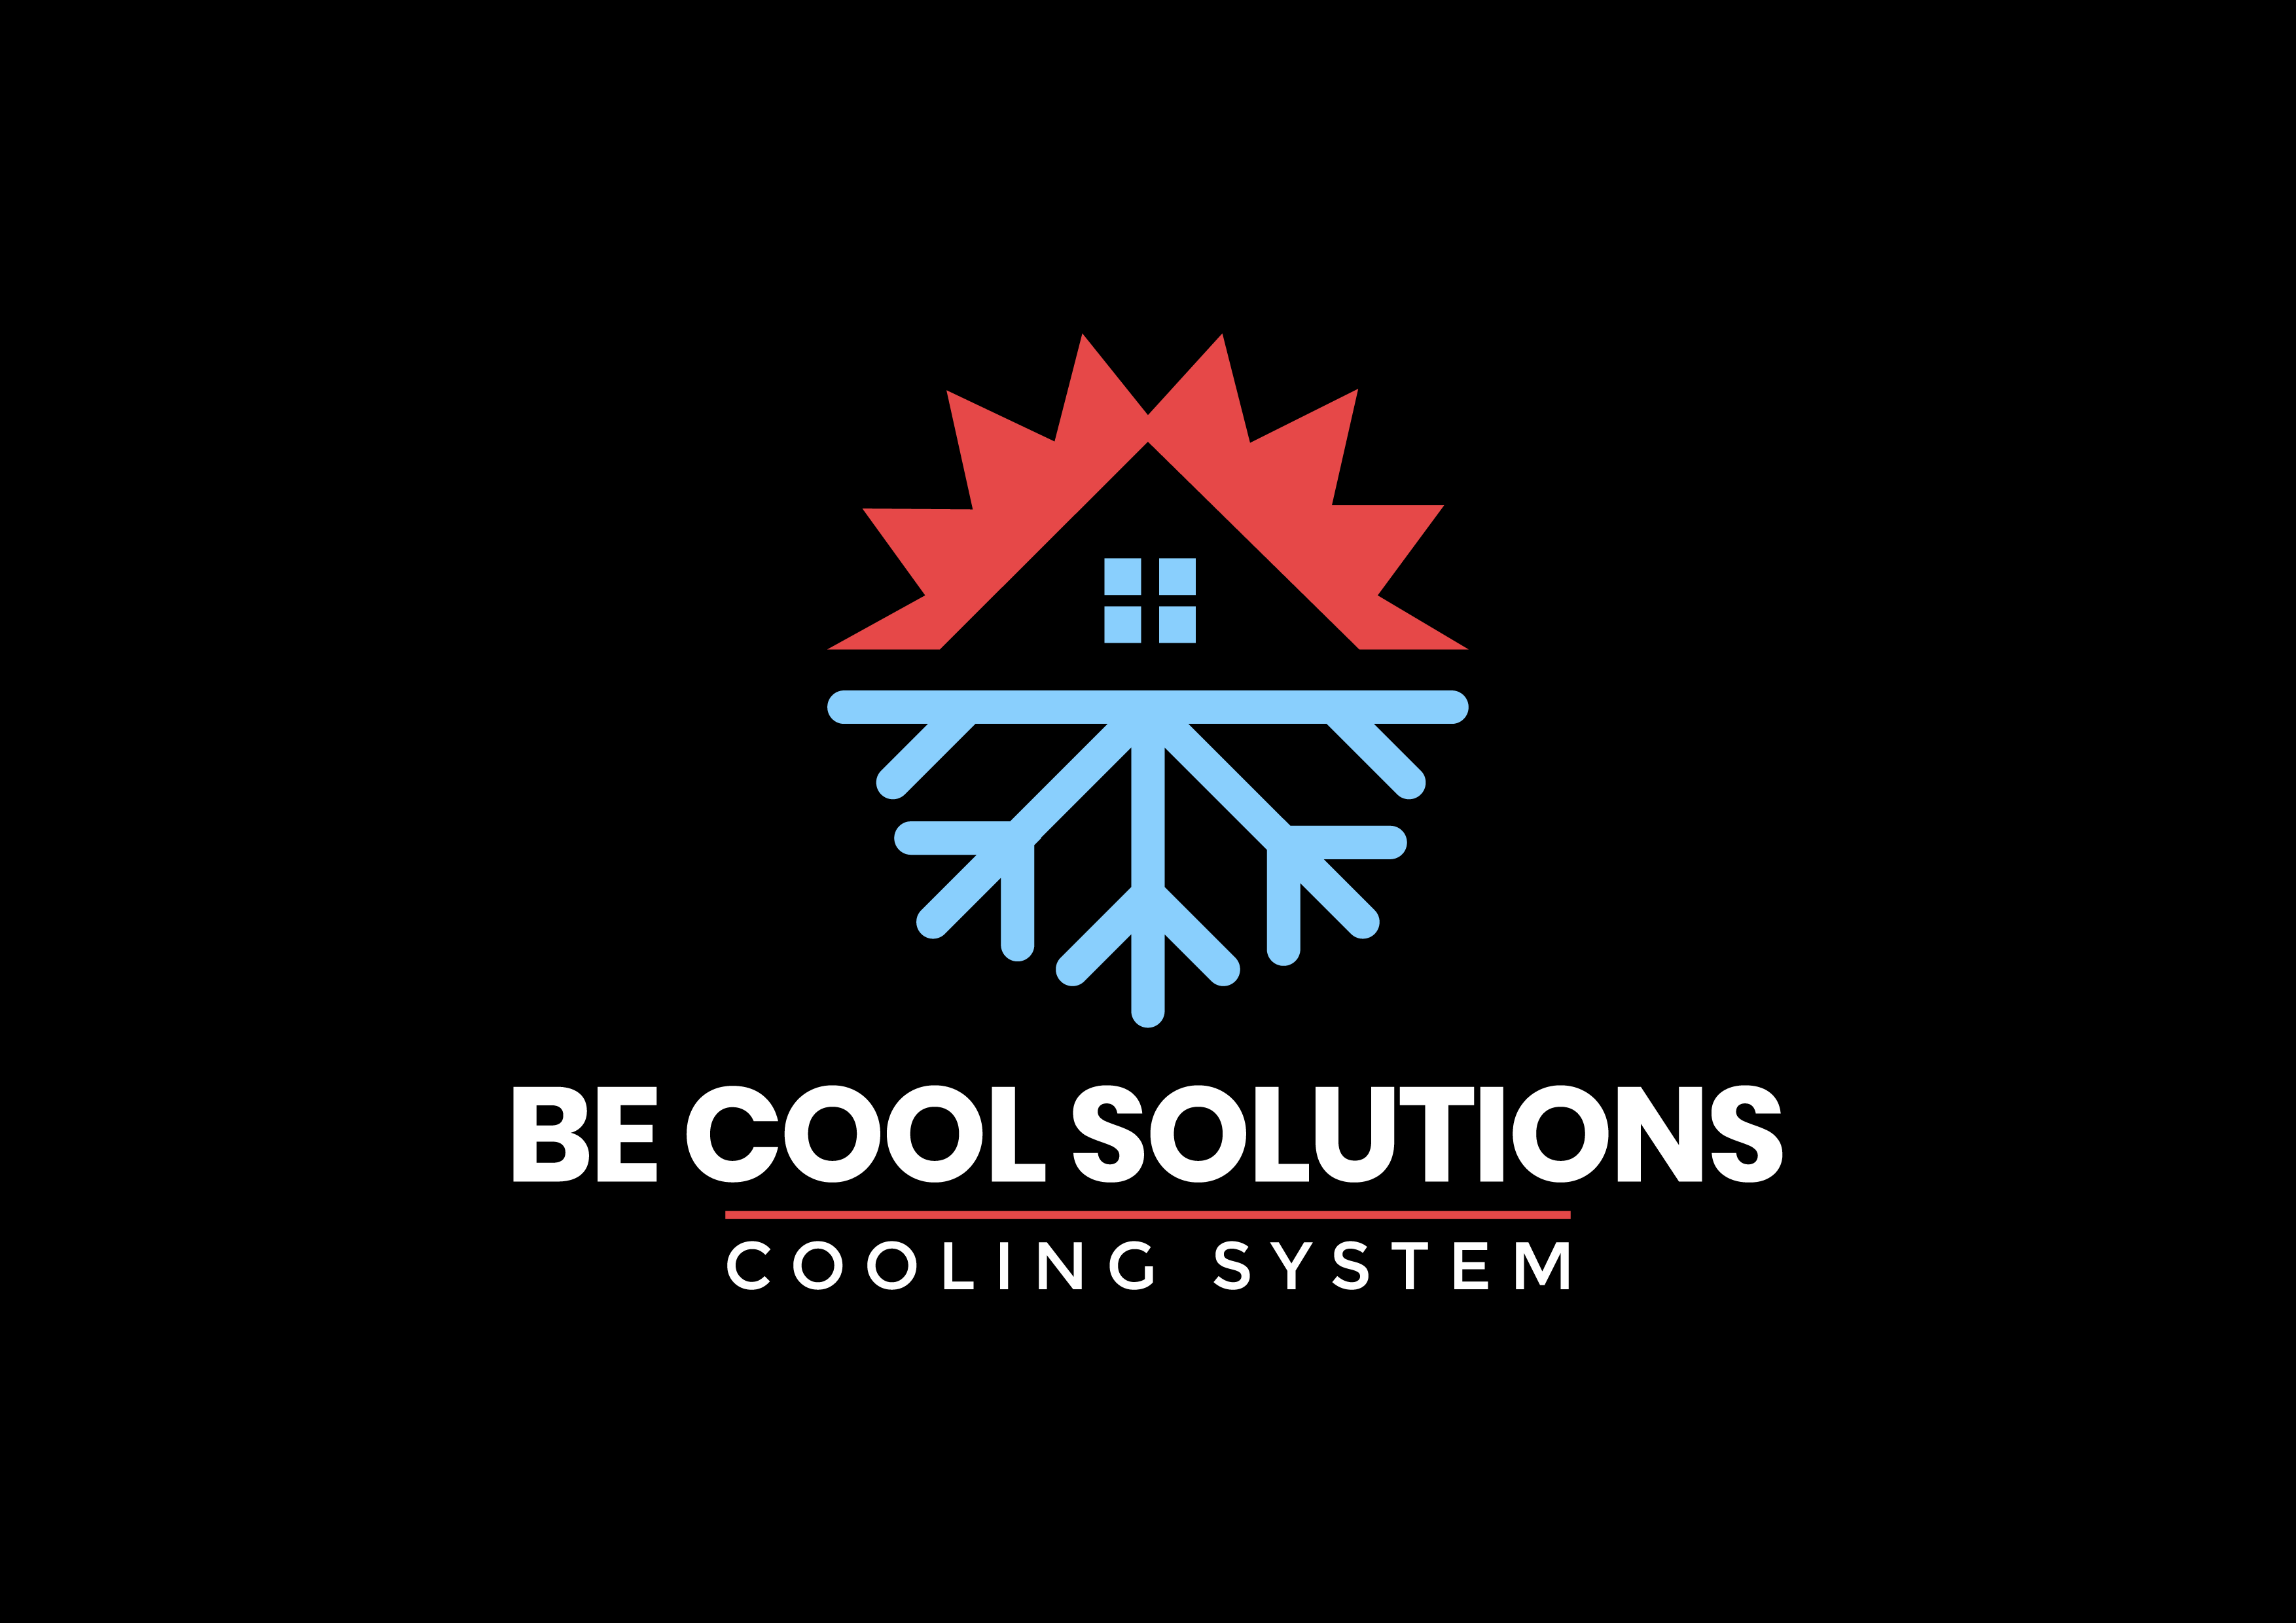 installateurs van airconditioning Genval Be Cool Solutions